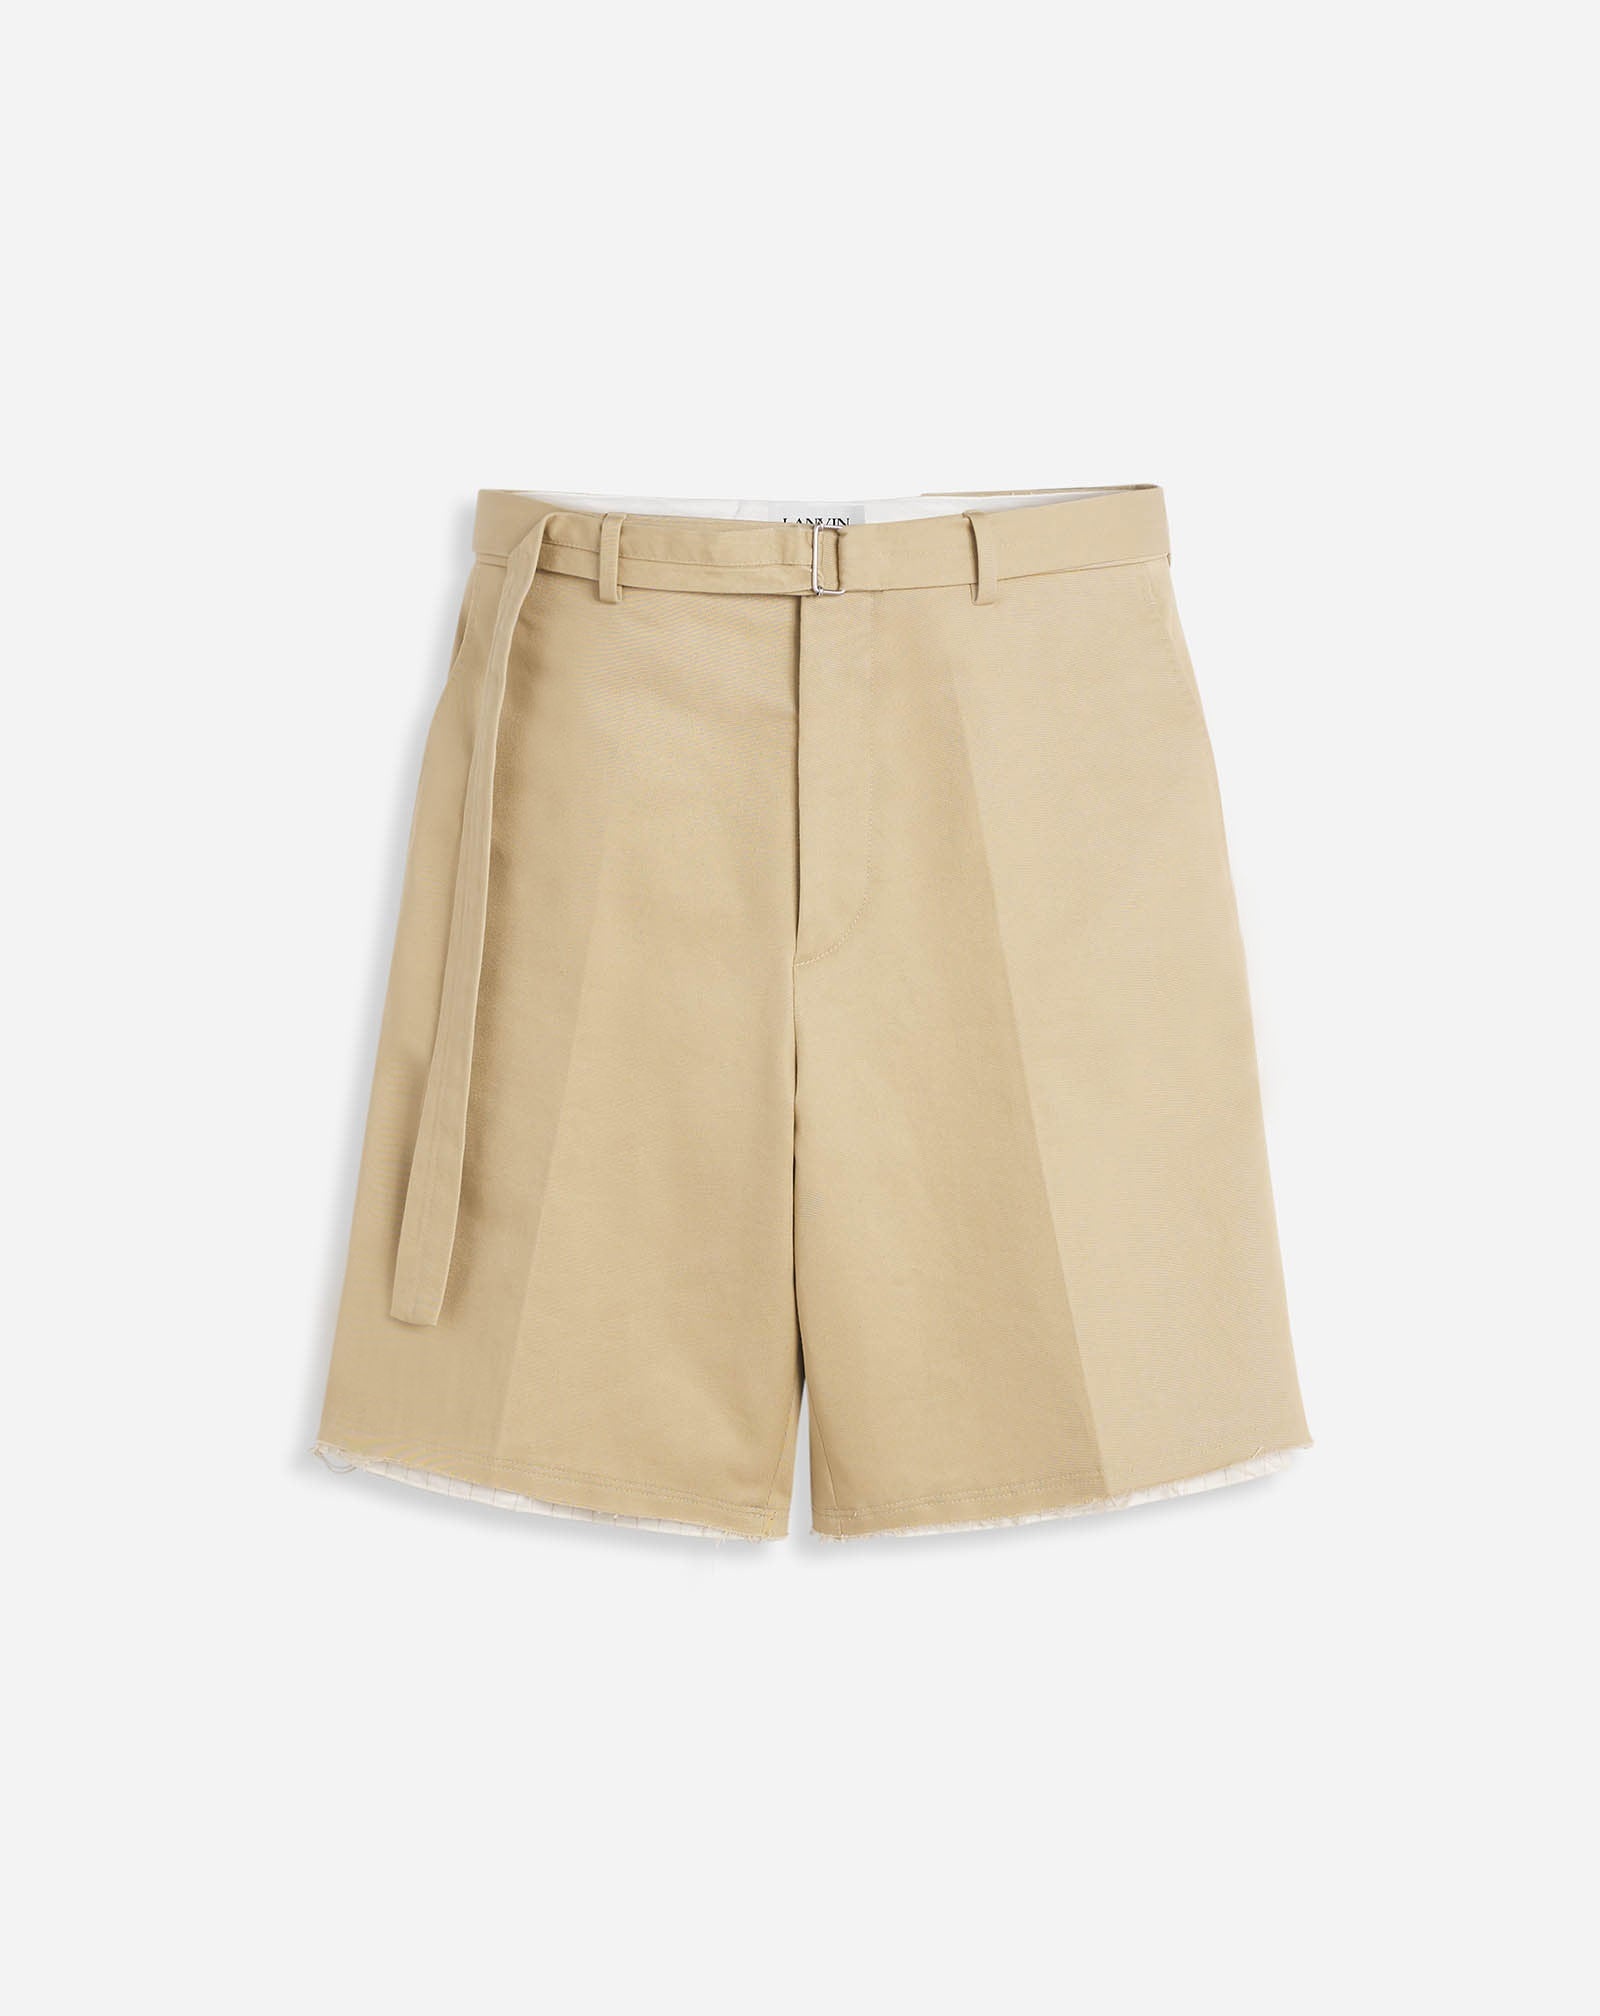 TAILORED SHORTS WITH RAW HEM DETAILS - 1